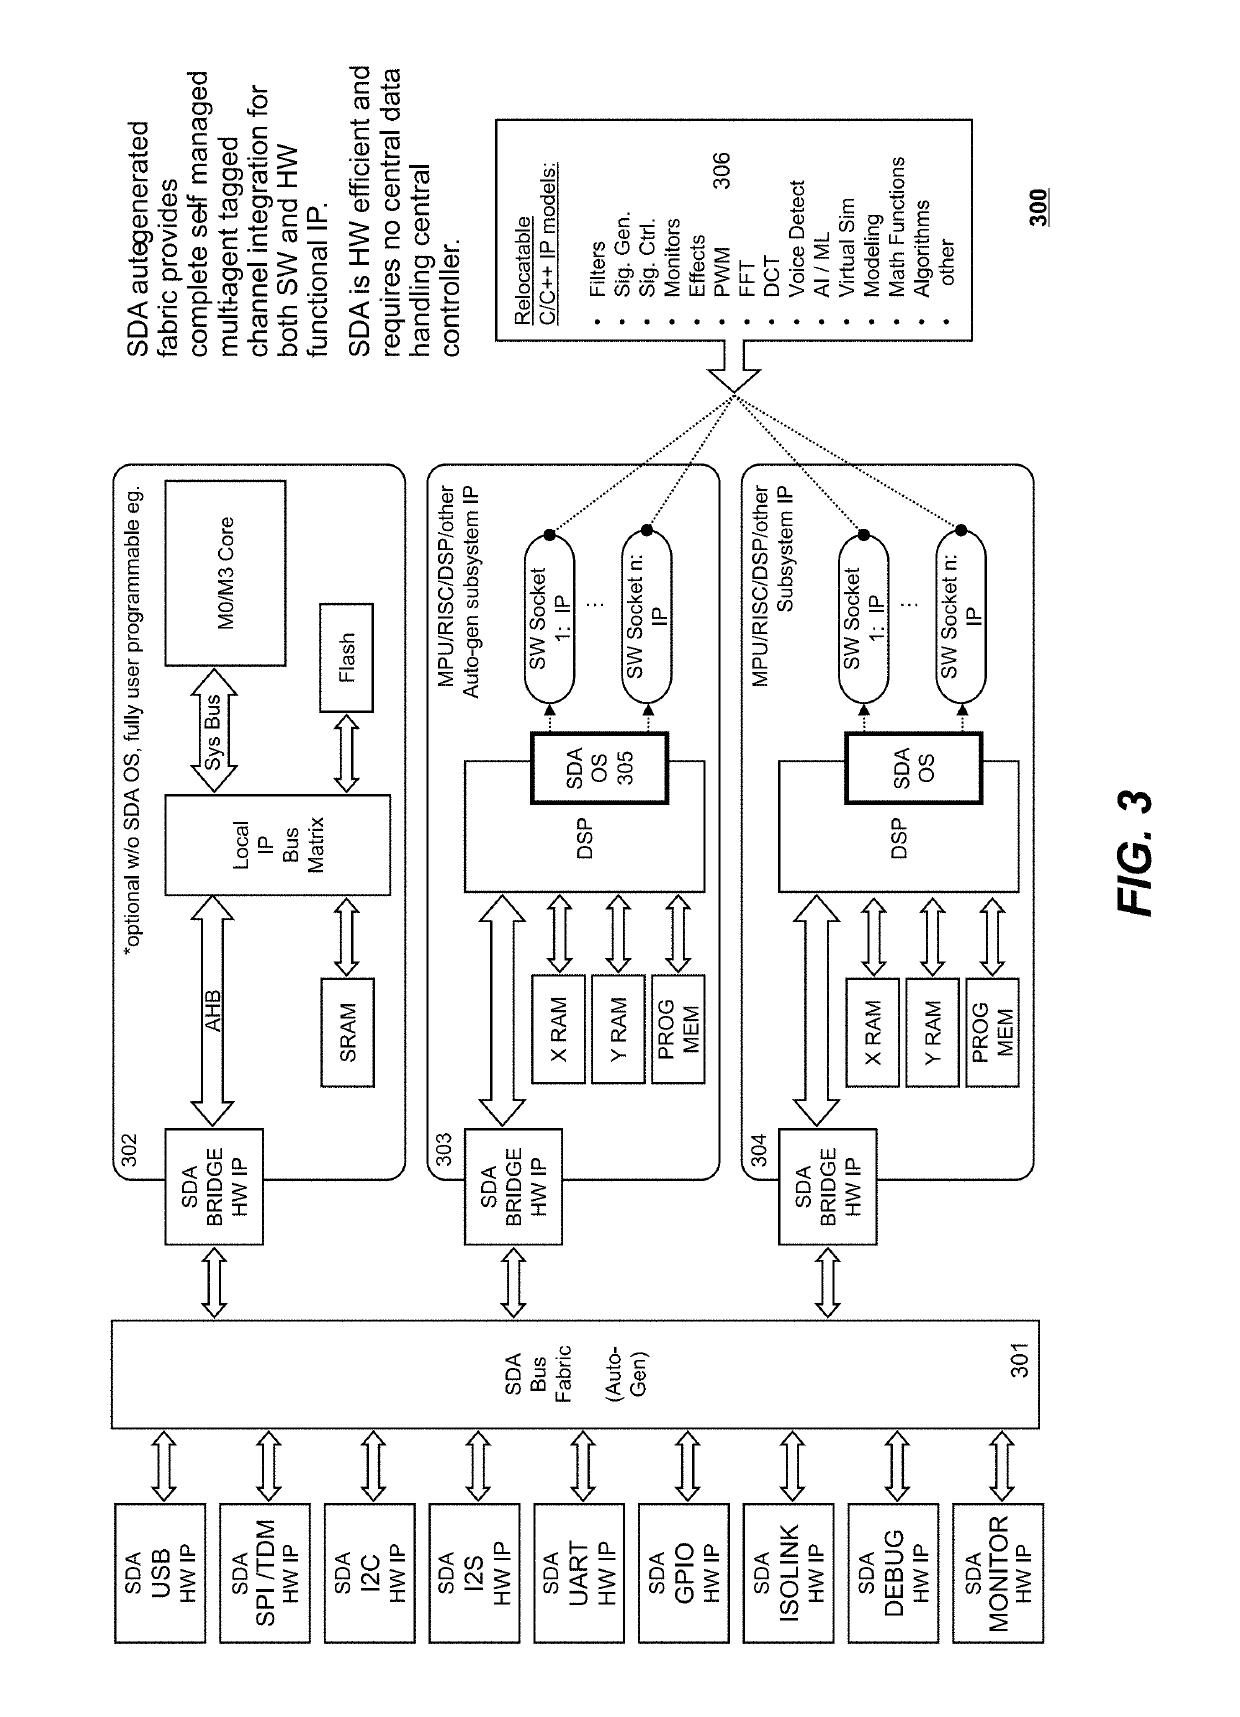 Methods and systems for system design automation (SDA) of mixed signal electronic circuitry including embedded software designs